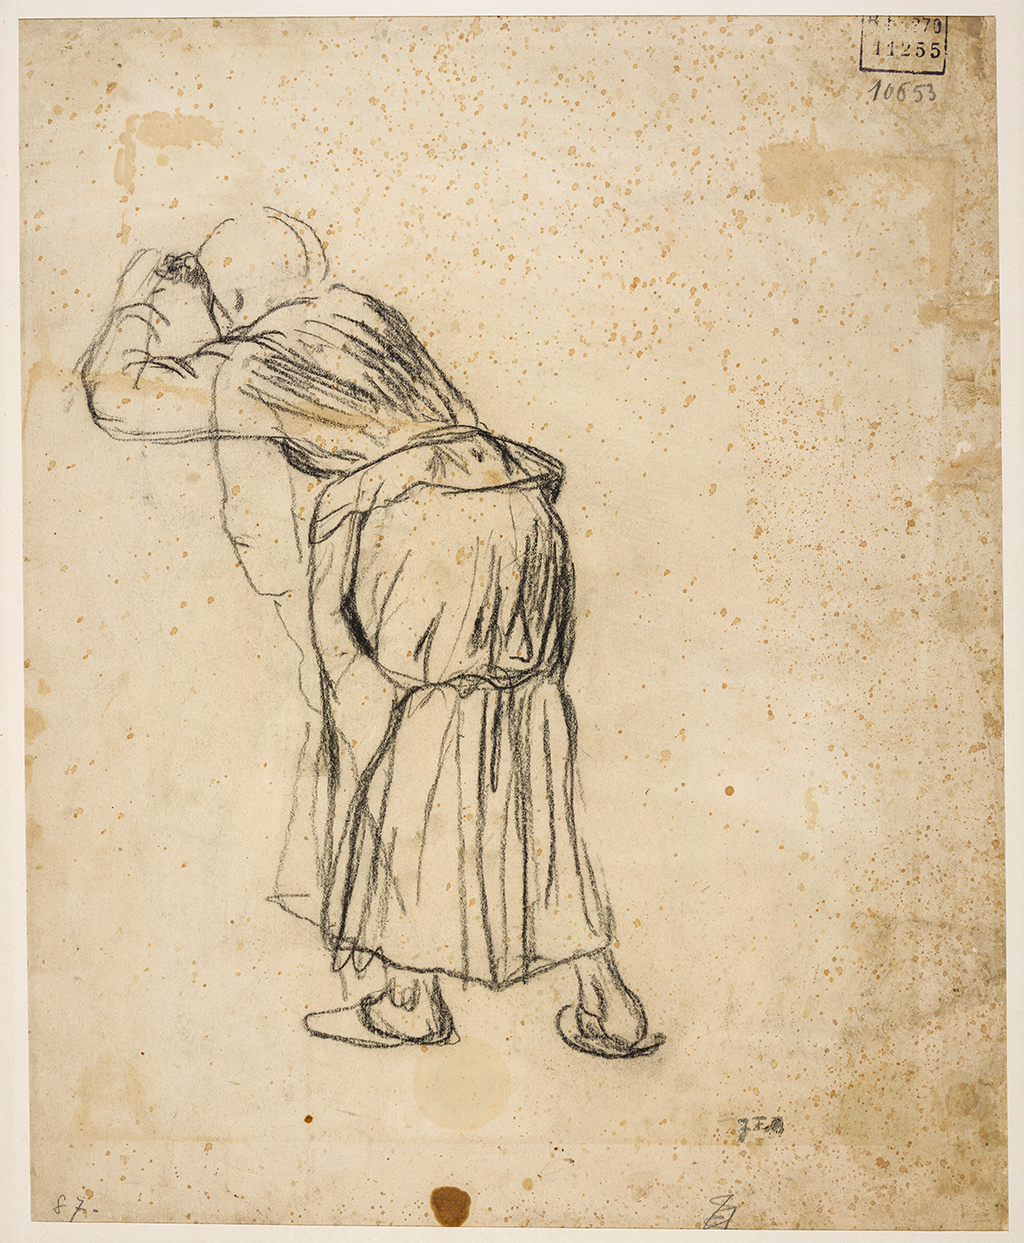 A sketch of a woman wearing a dress and cap. She is bent over and looking into the distance with her arm raised to her forehead.